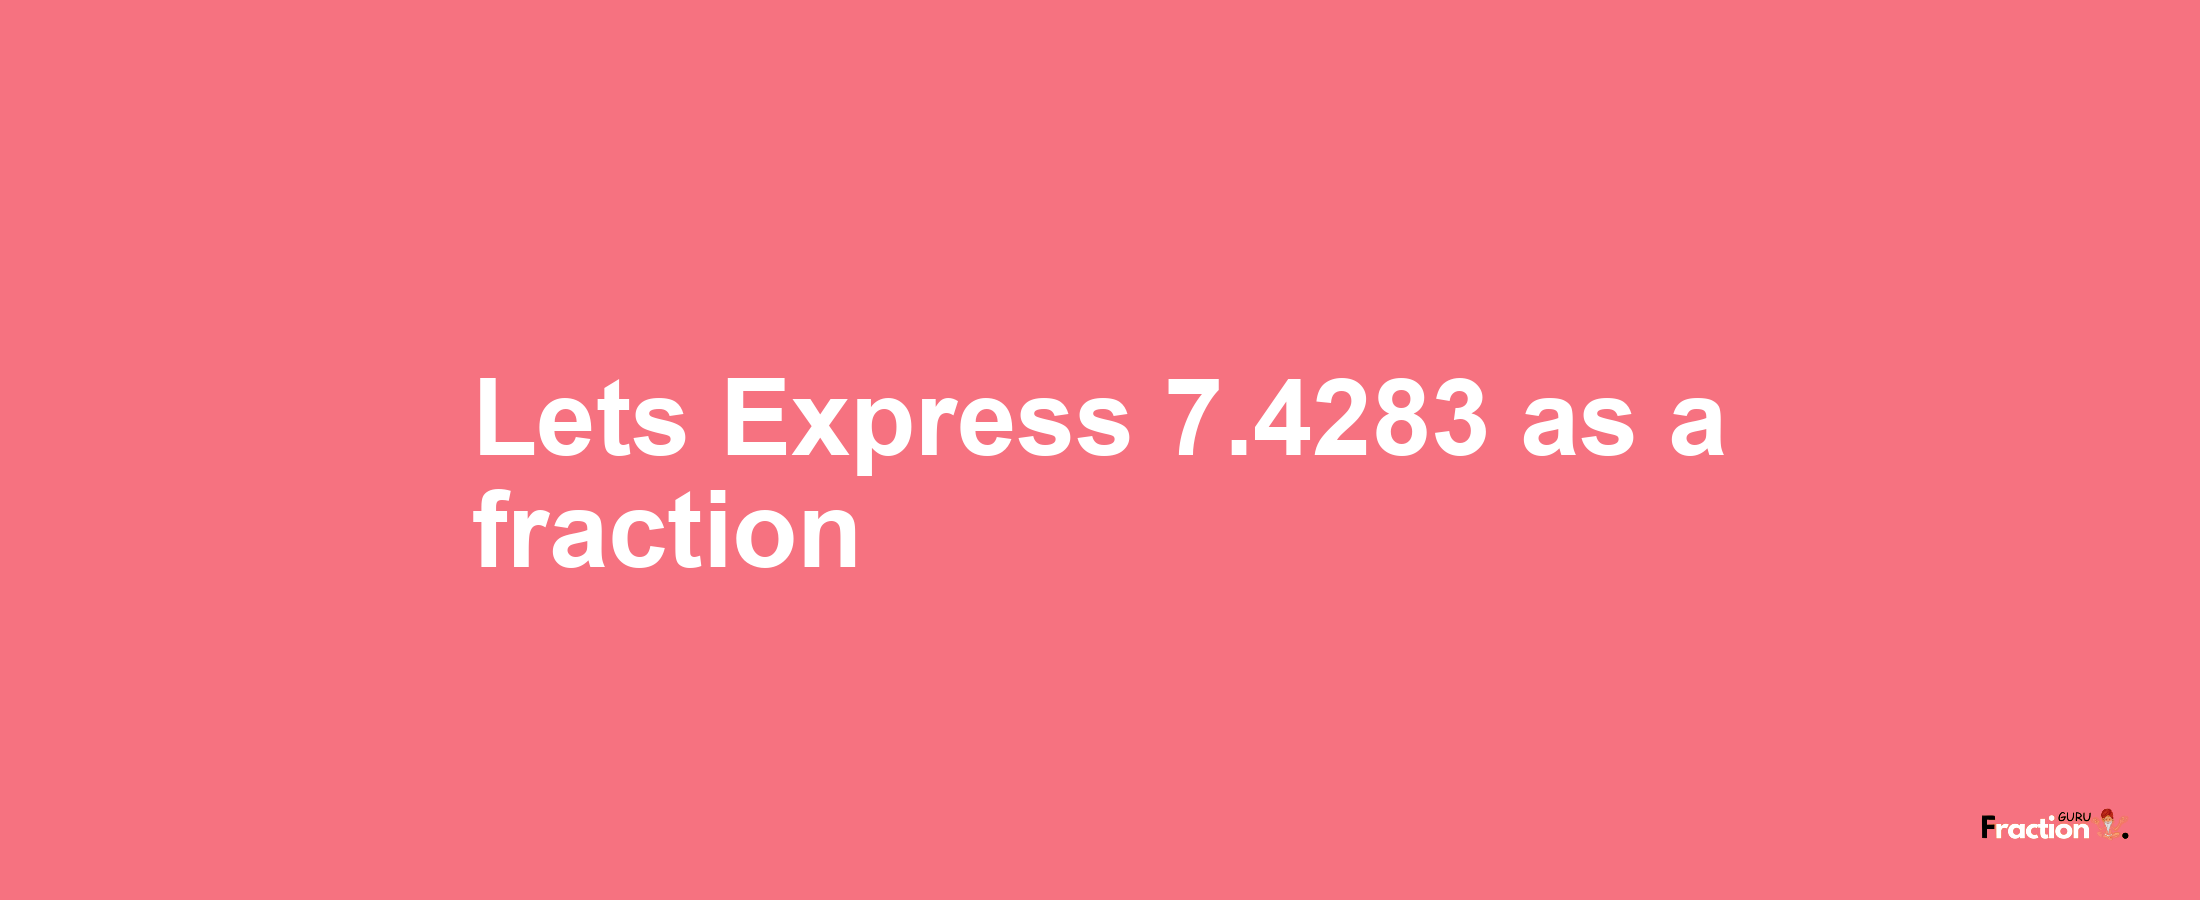 Lets Express 7.4283 as afraction